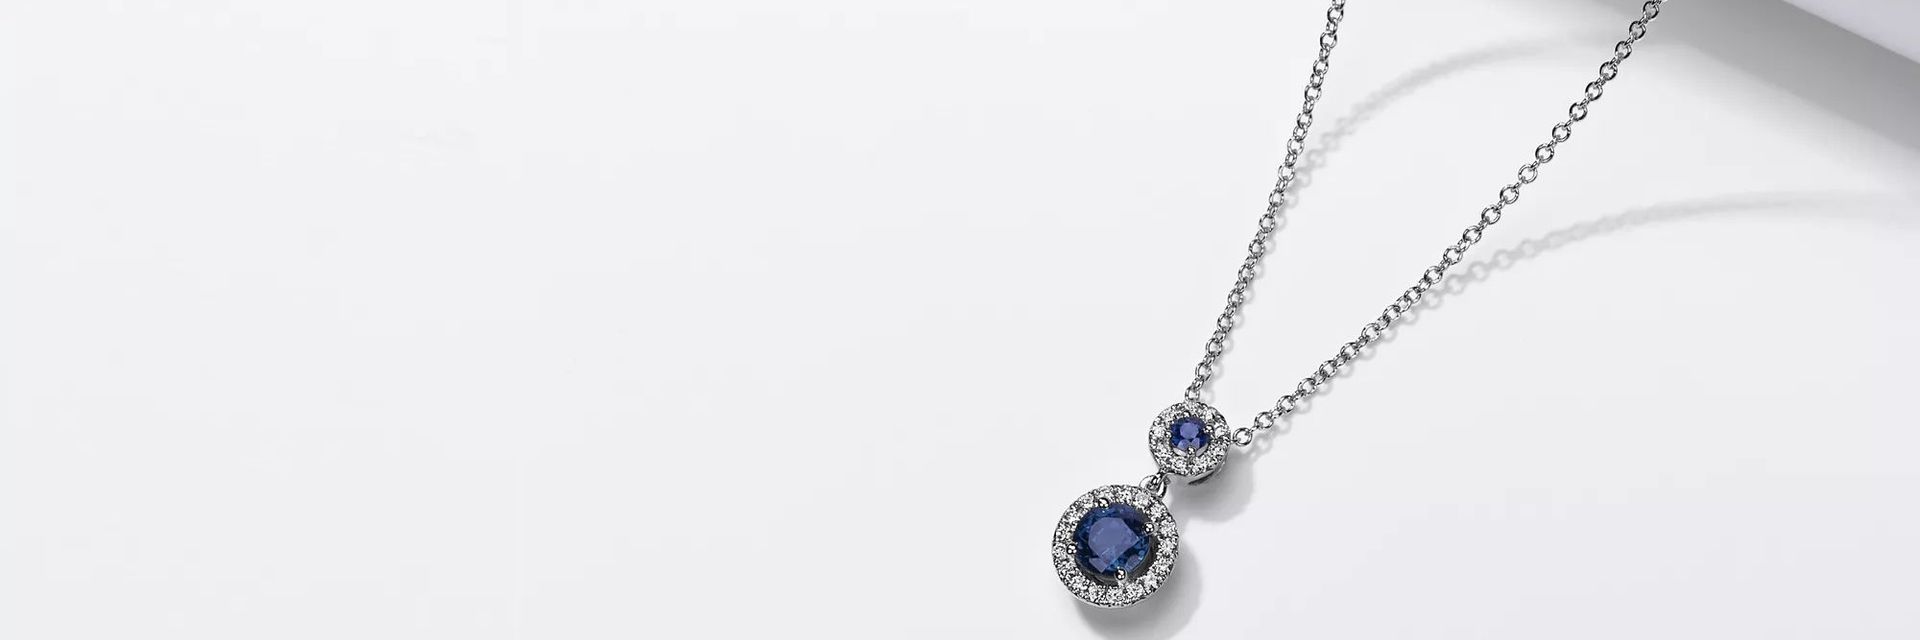 14k white gold pendant featuring two sapphires surrounded by diamond halos.